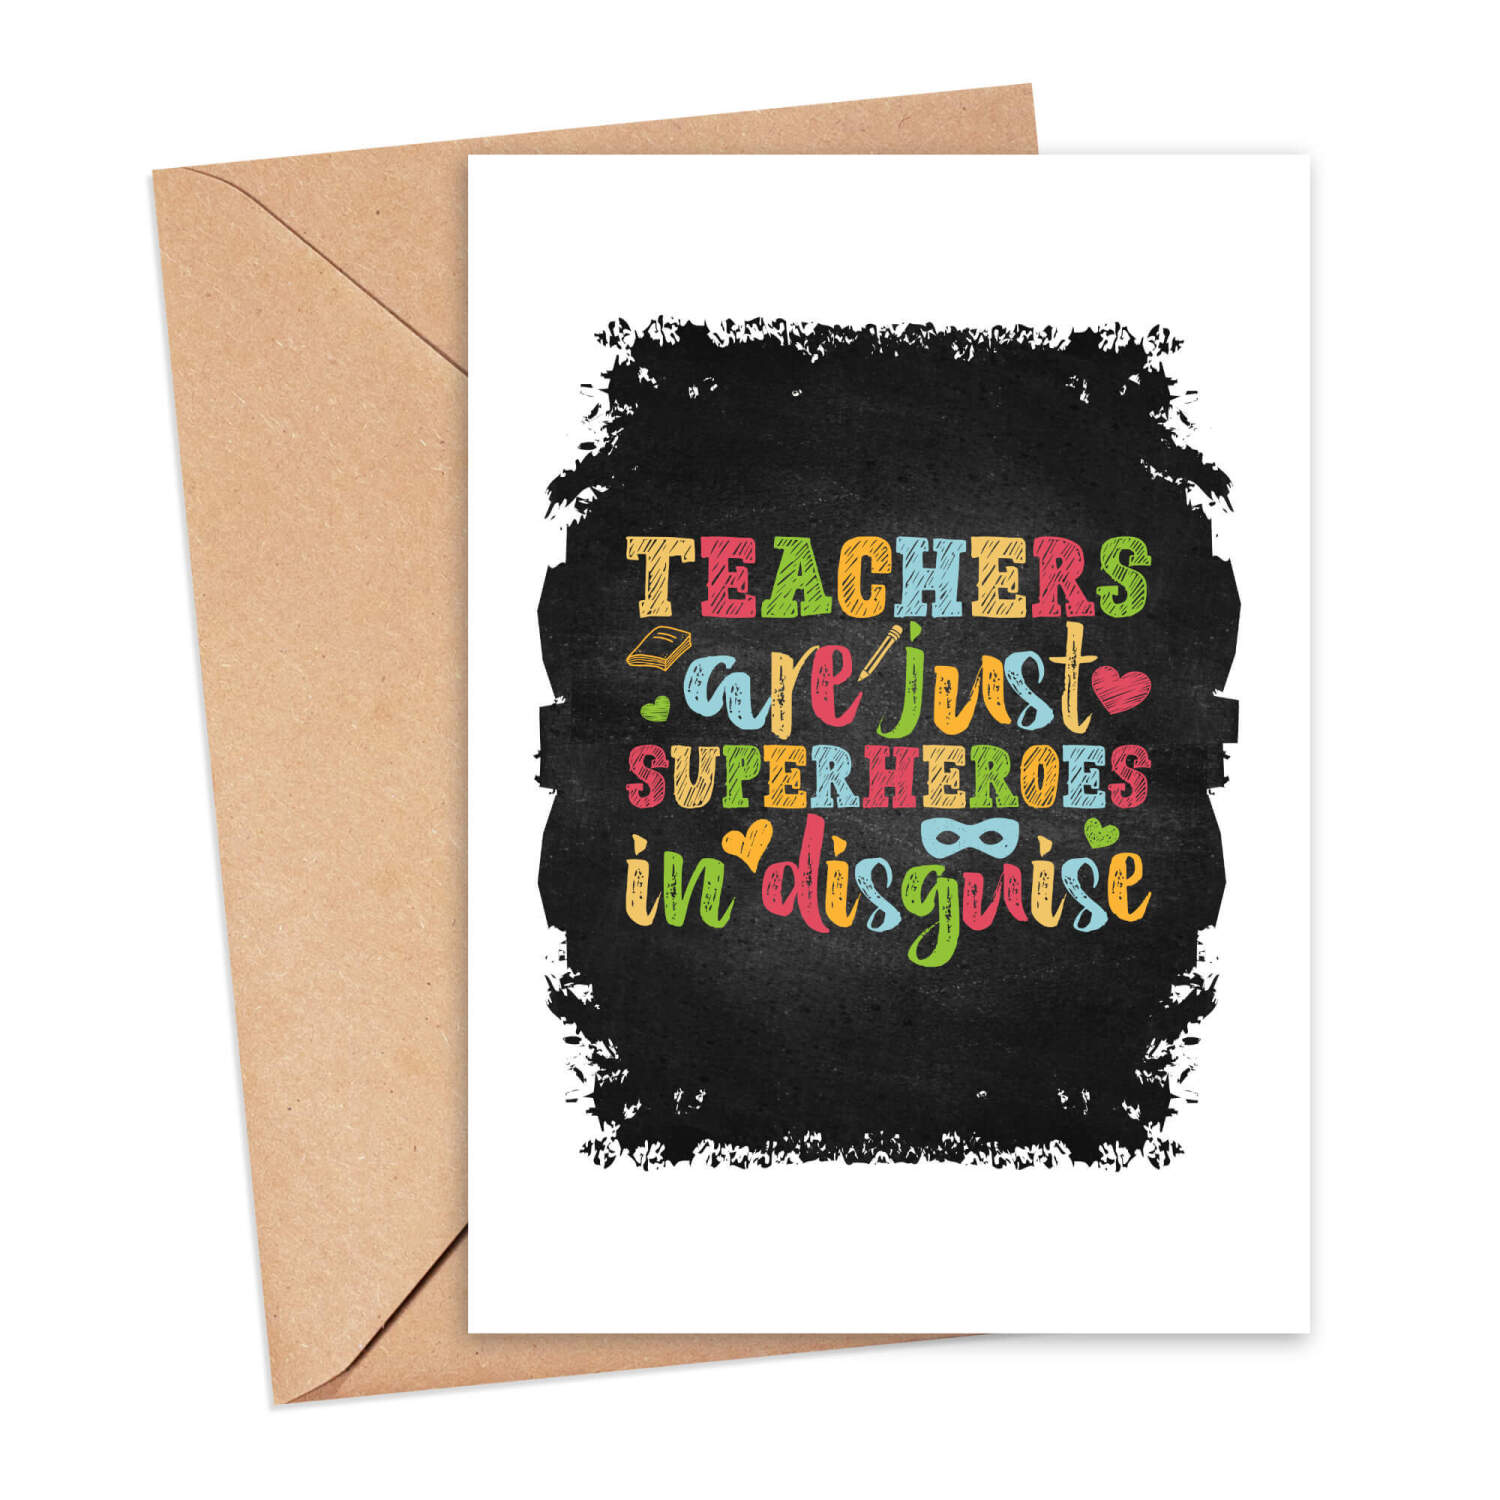 Thank You Teacher Card - Teachers Are Just Superheroes In Disguise - Small - Approx. A6 | 105mm x 14.8mm | 4.1in x 5.8in